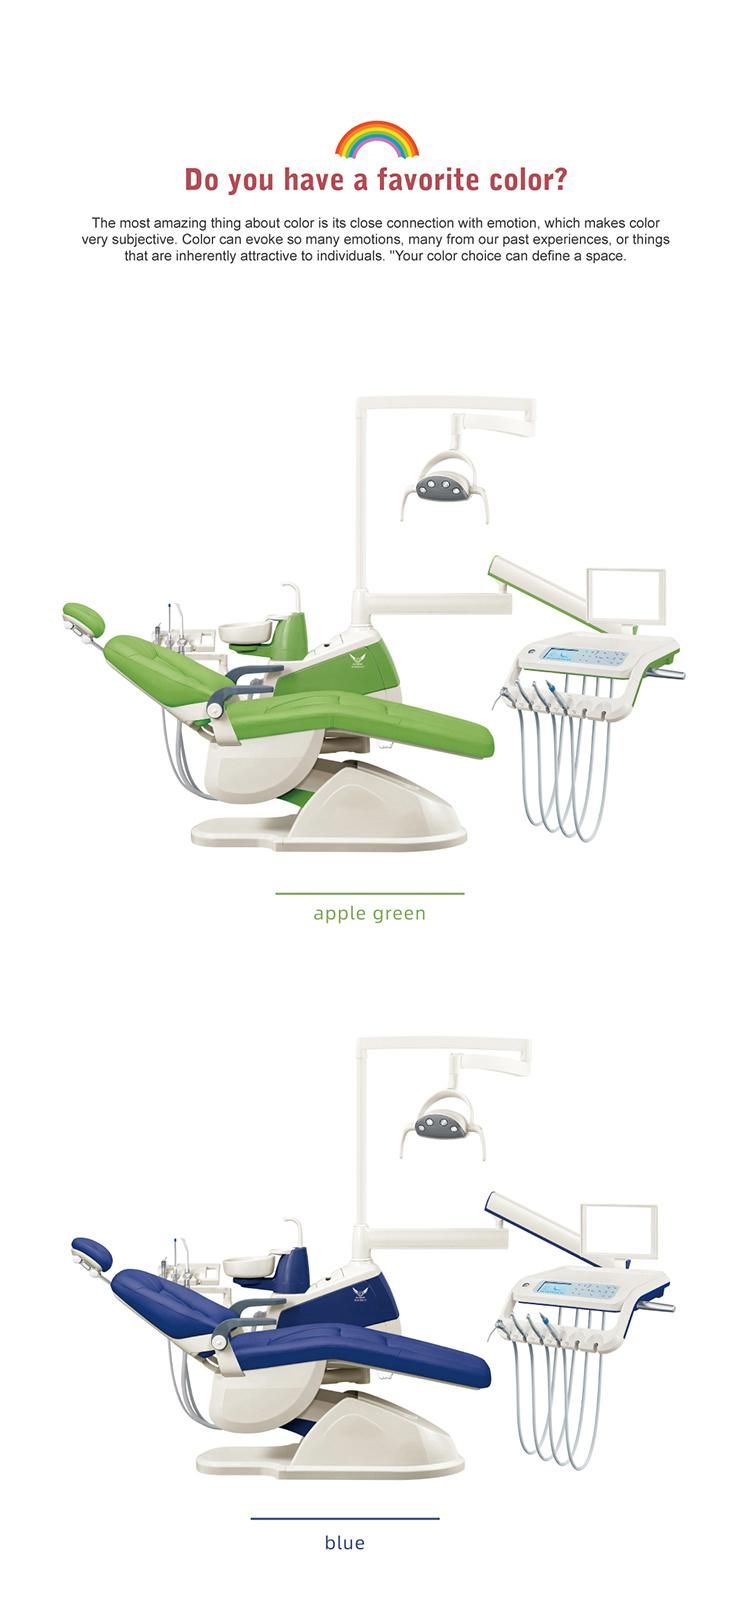 Best Dental Chair for Dental Clinic and Hospital